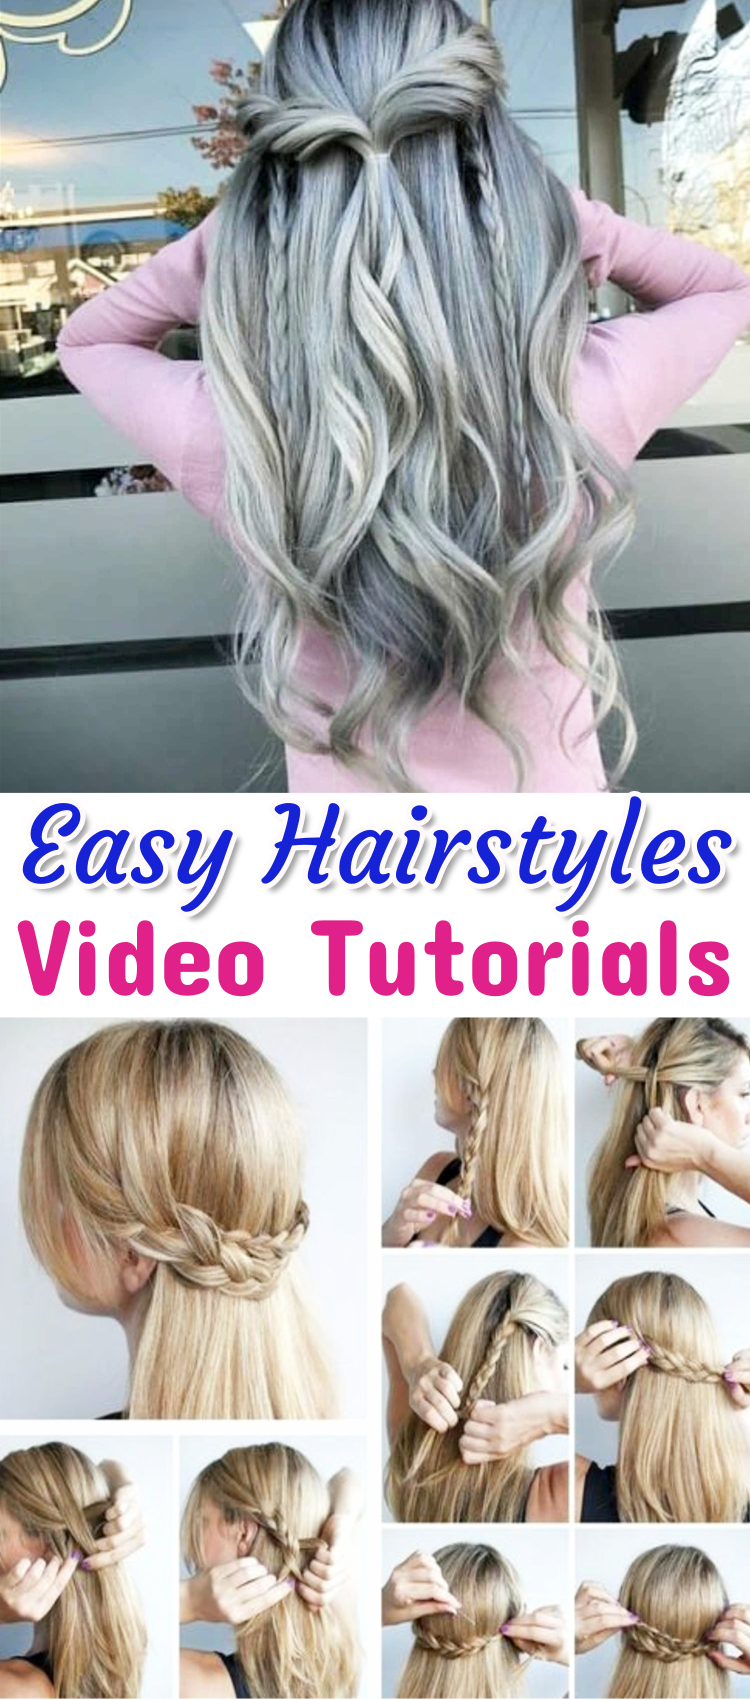 Lazy Hairstyles - Easy hairstyle ideas video tutorials - easy step by step instructions - lazy hairstyles of medium hair, long hair, short hair, for work, for school or just simple messy hairstyles for lazy days (great for beginners)